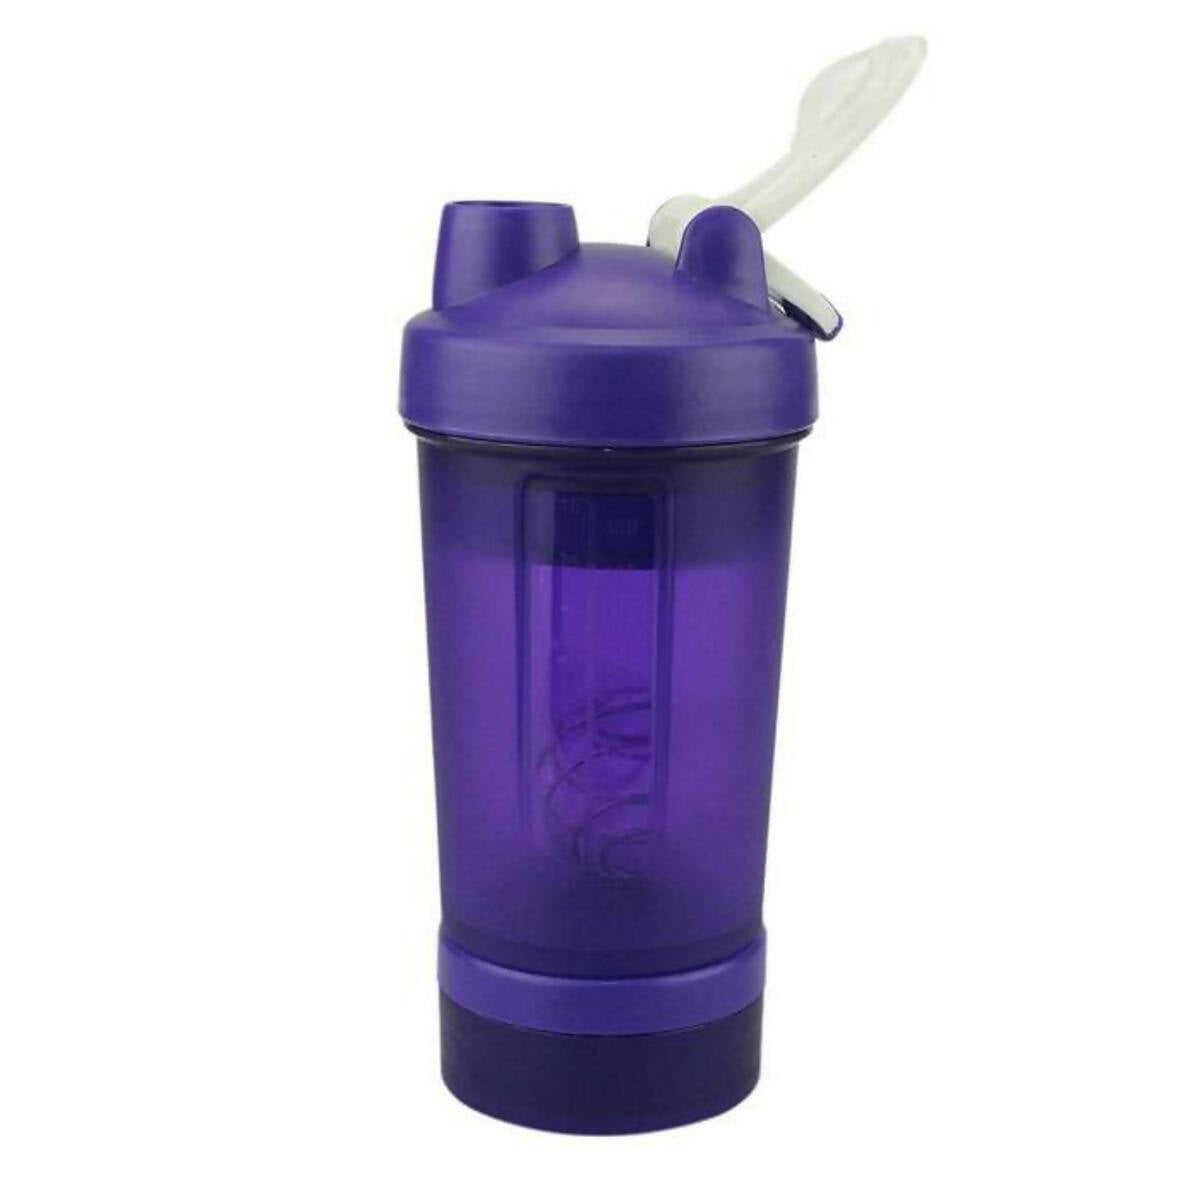 3 in 1 Sports Shaker Bottle For Gym - Storage & Pill Compartments - 450ml - Purple